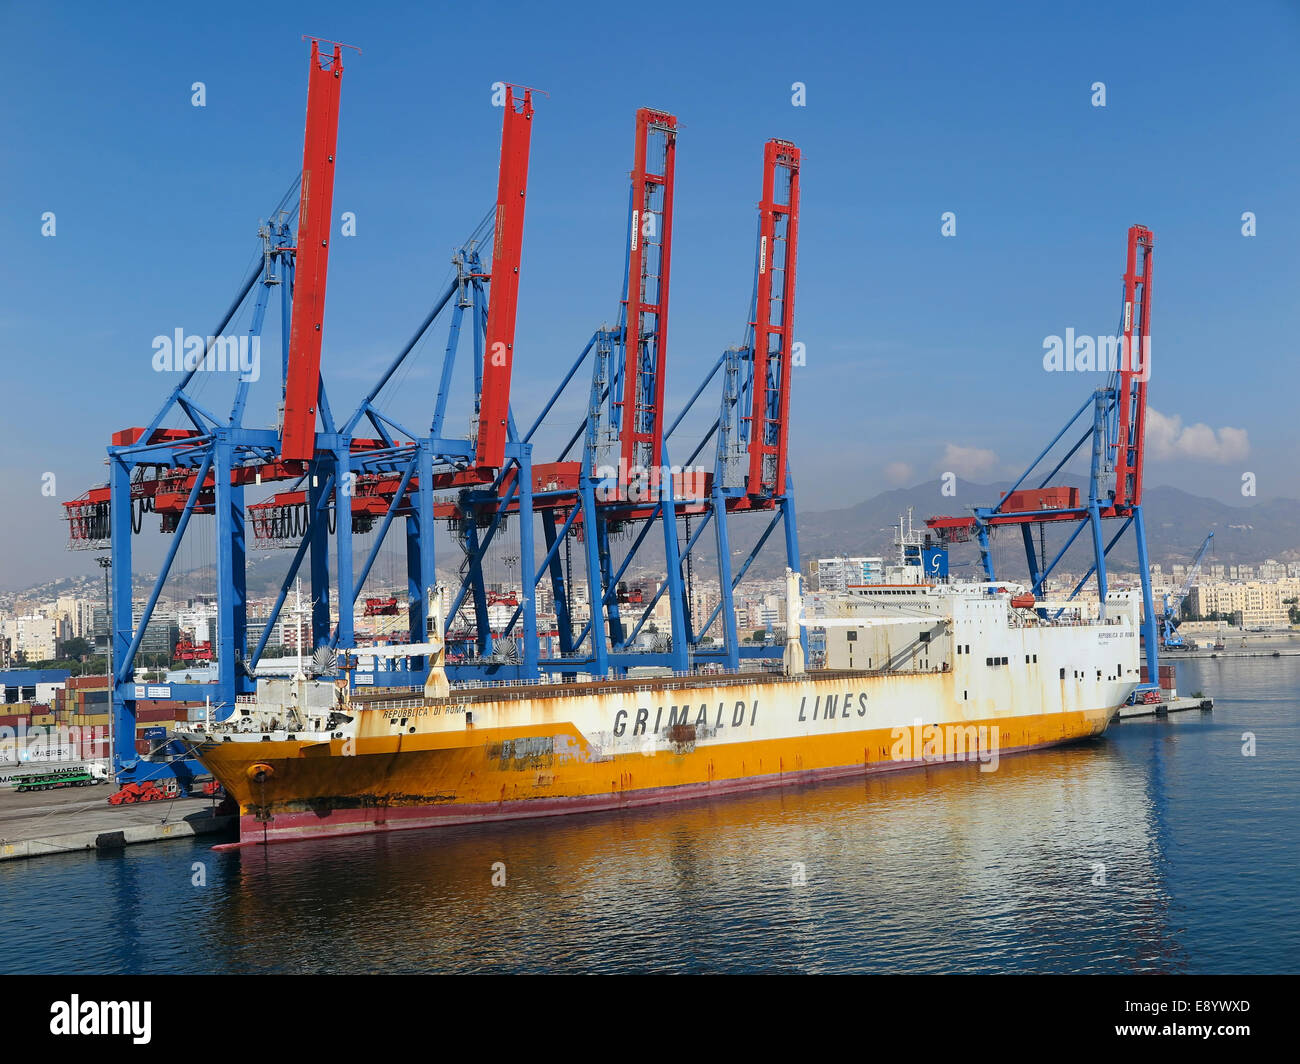 Grimaldi Line ferry docked at Malaga Harbour in Spain Stock Photo